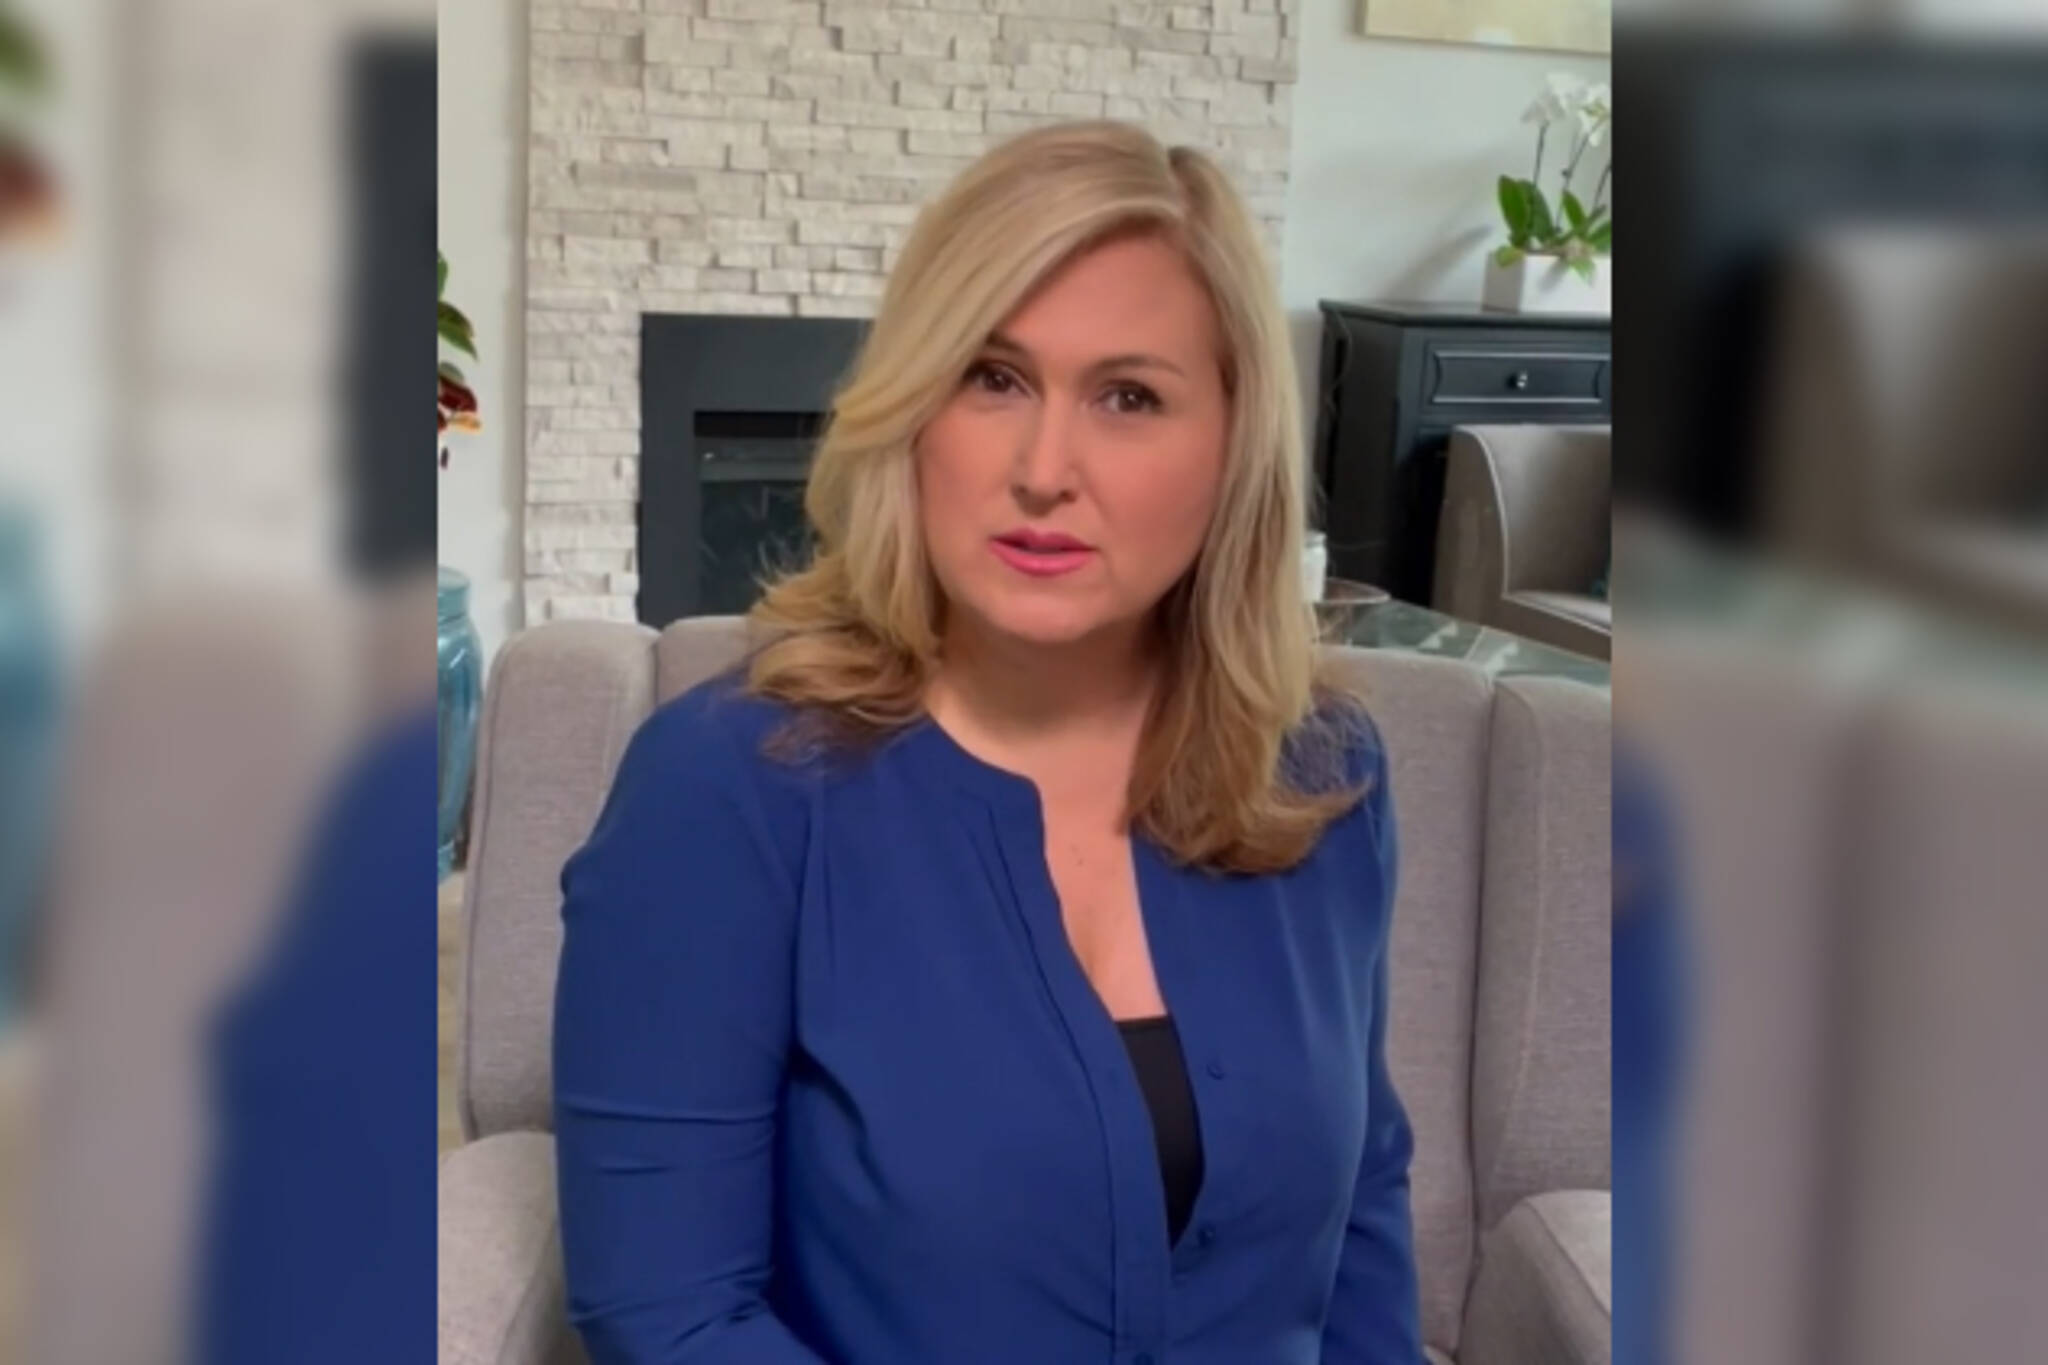 Toronto TV icon posts explosive video detailing rampant workplace sexism